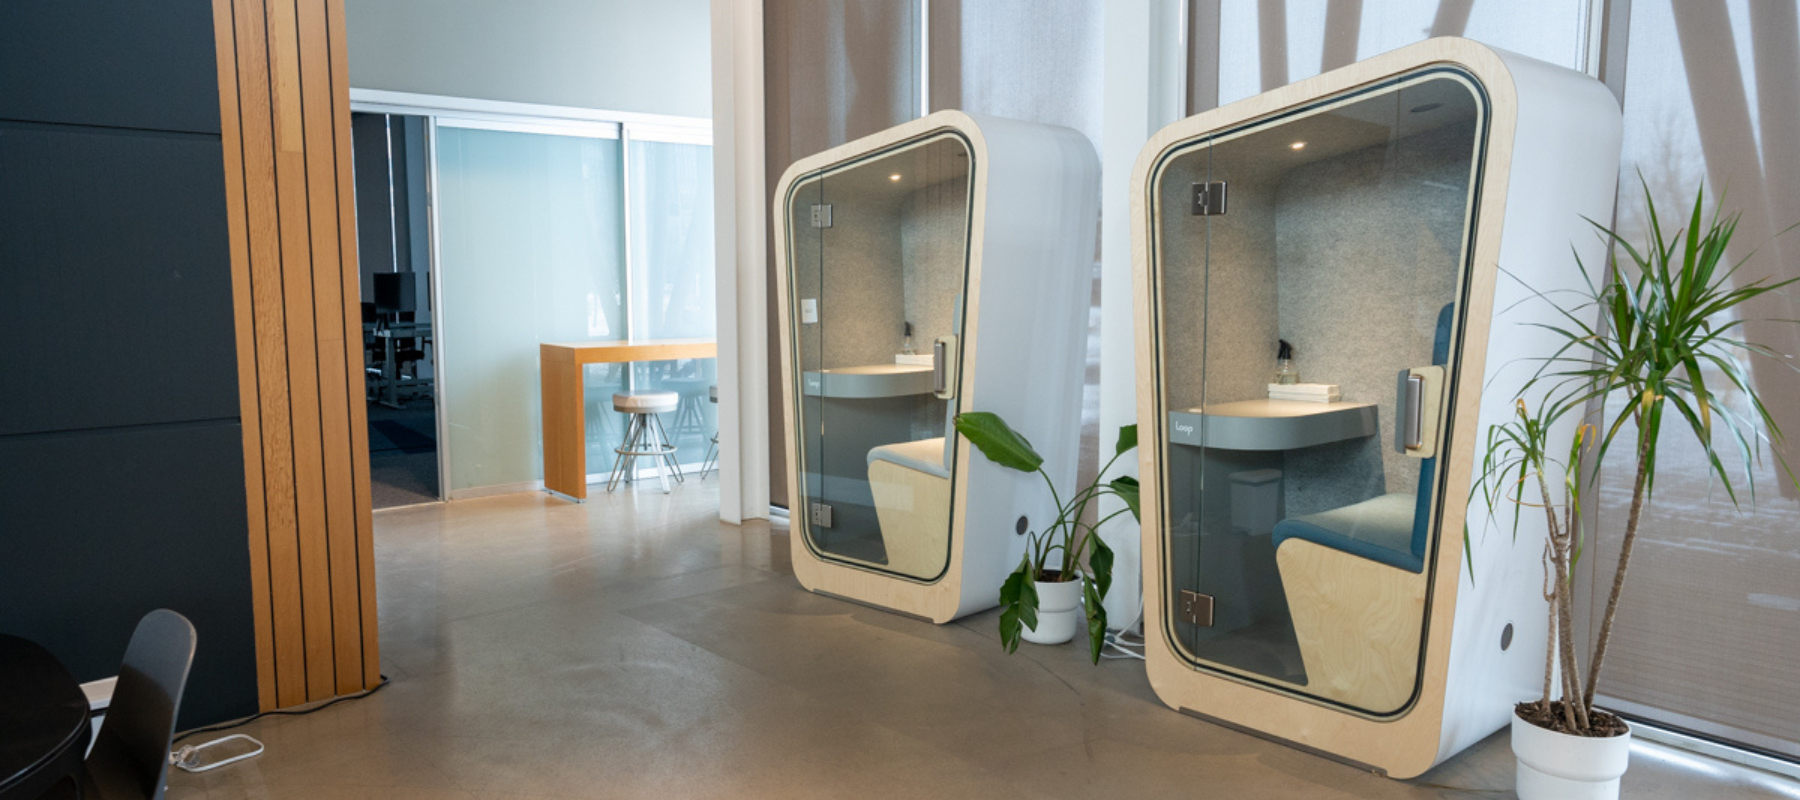 two single loop phone booth style office pods against a wall